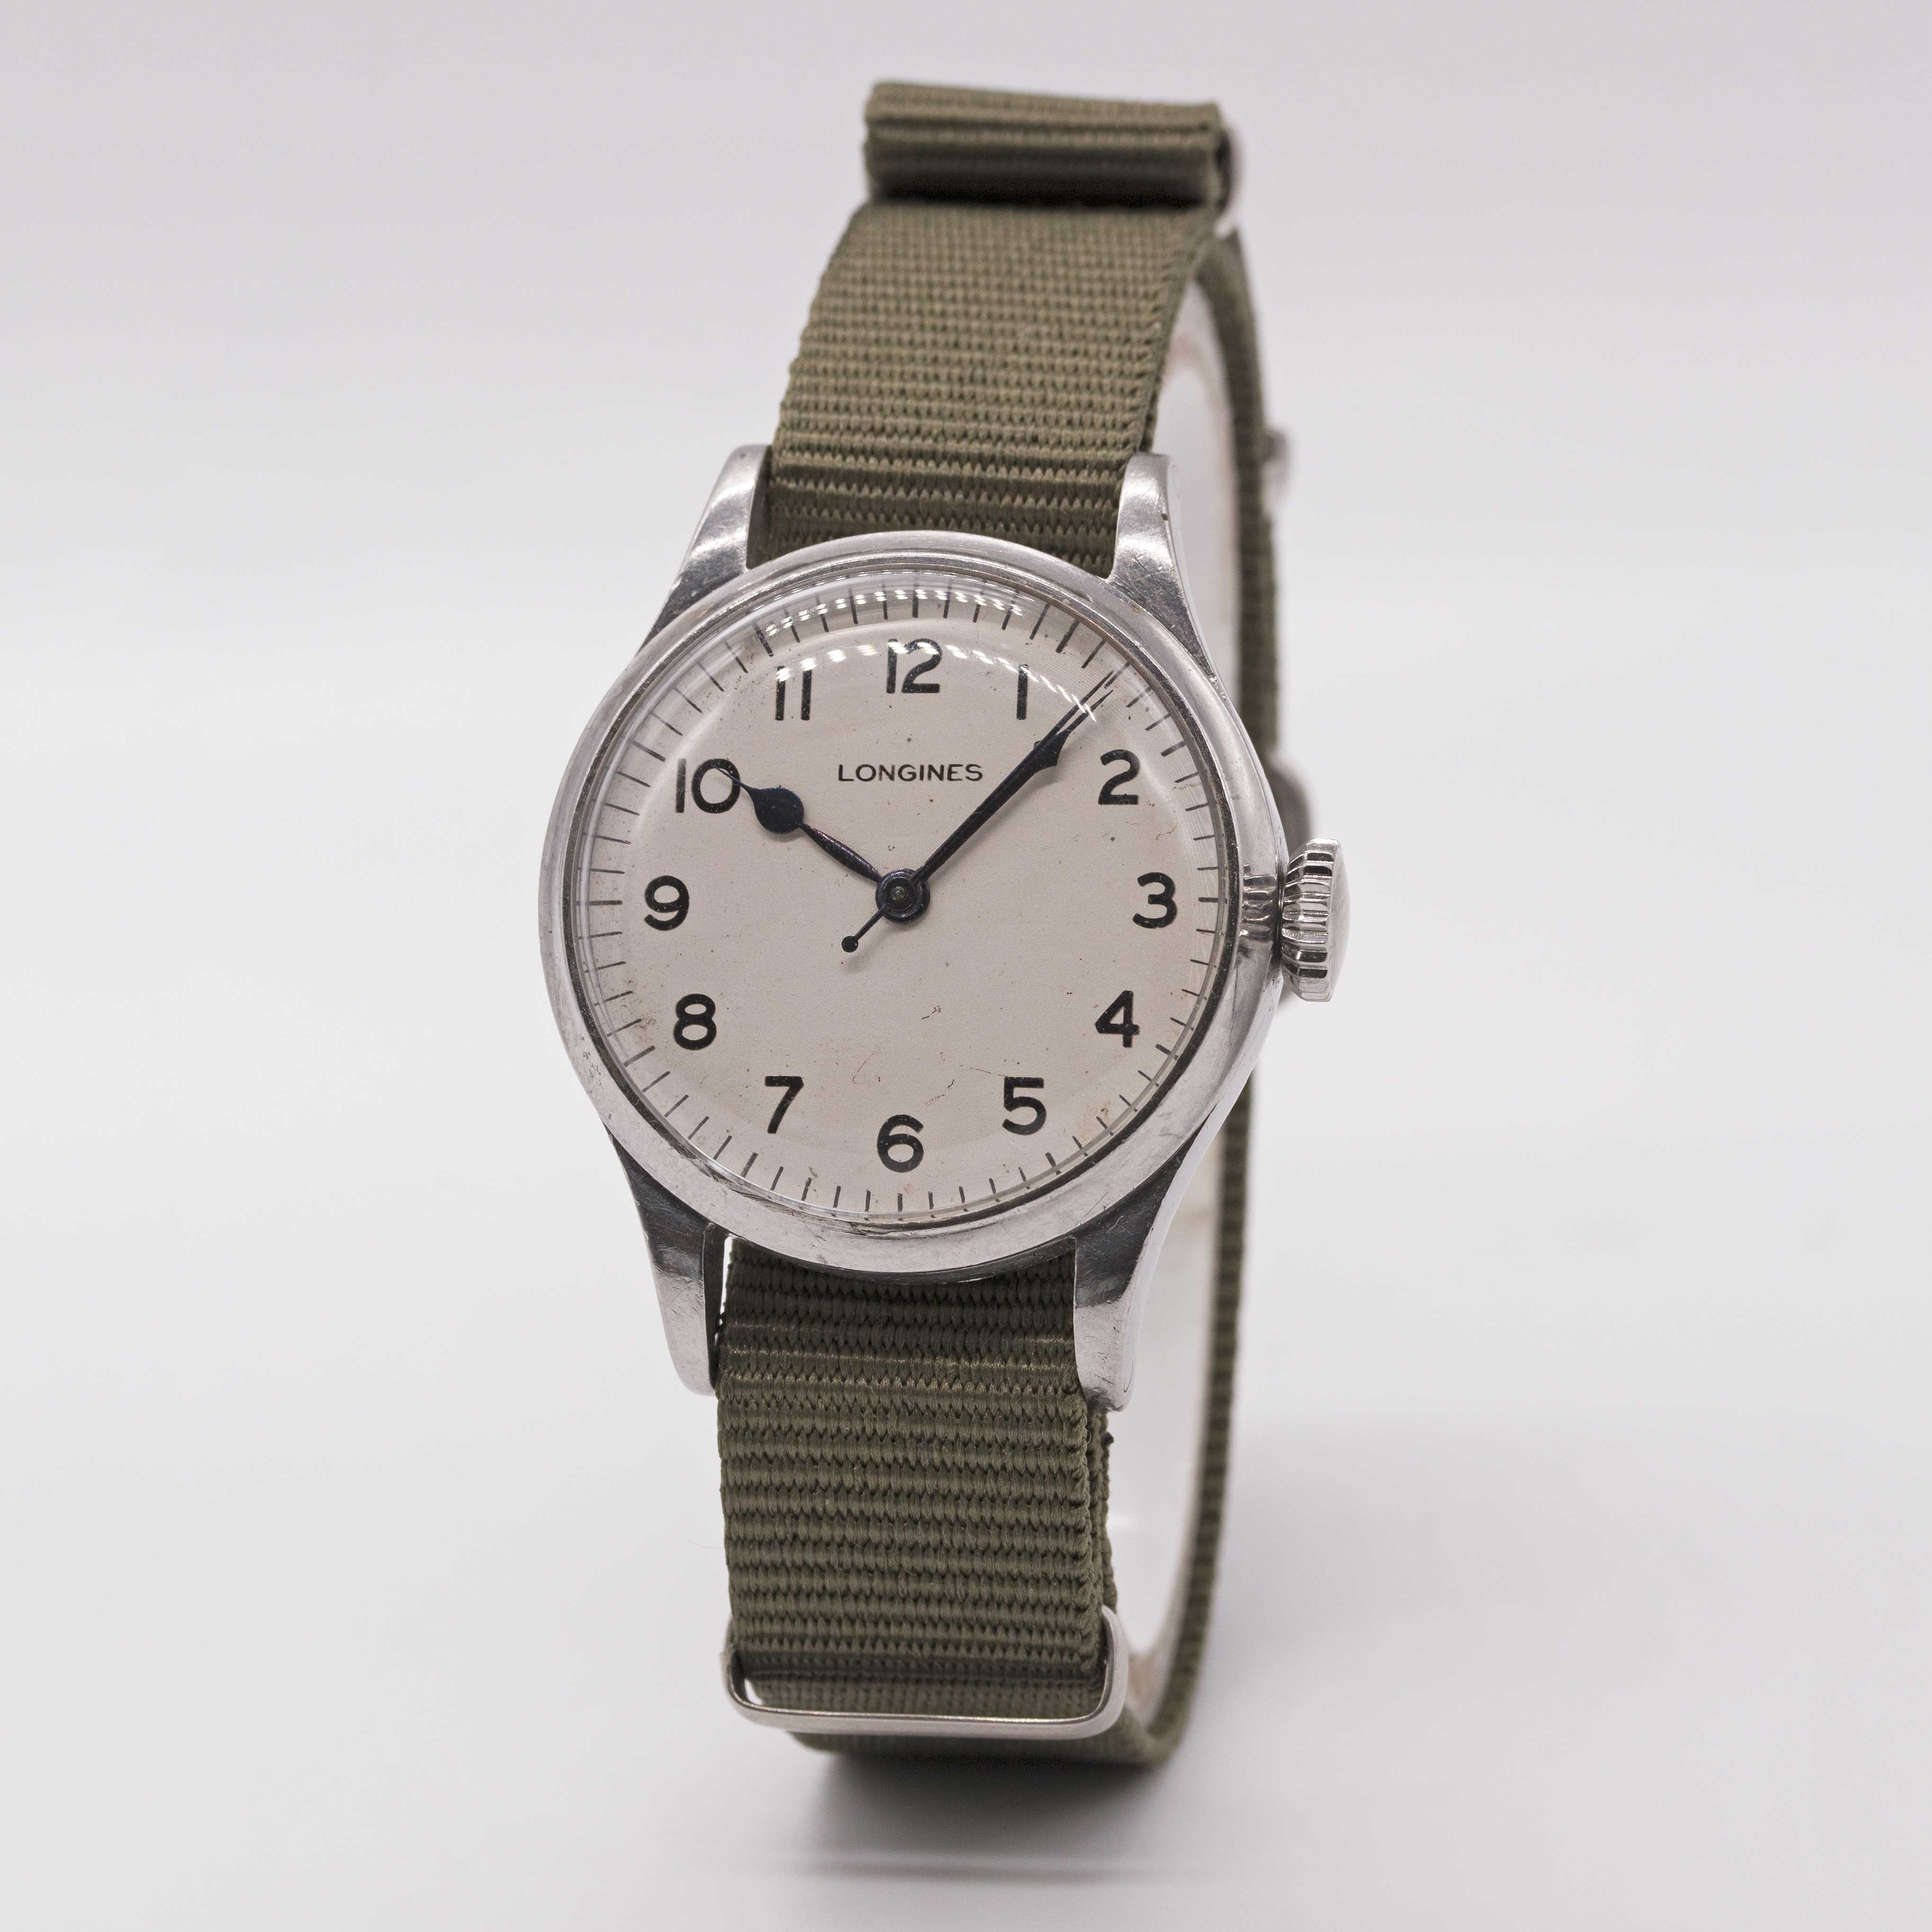 A GENTLEMAN'S BRITISH MILITARY LONGINES RAF PILOTS WRIST WATCH CIRCA 1940, WITH WHITE MOD DIAL - Image 4 of 9